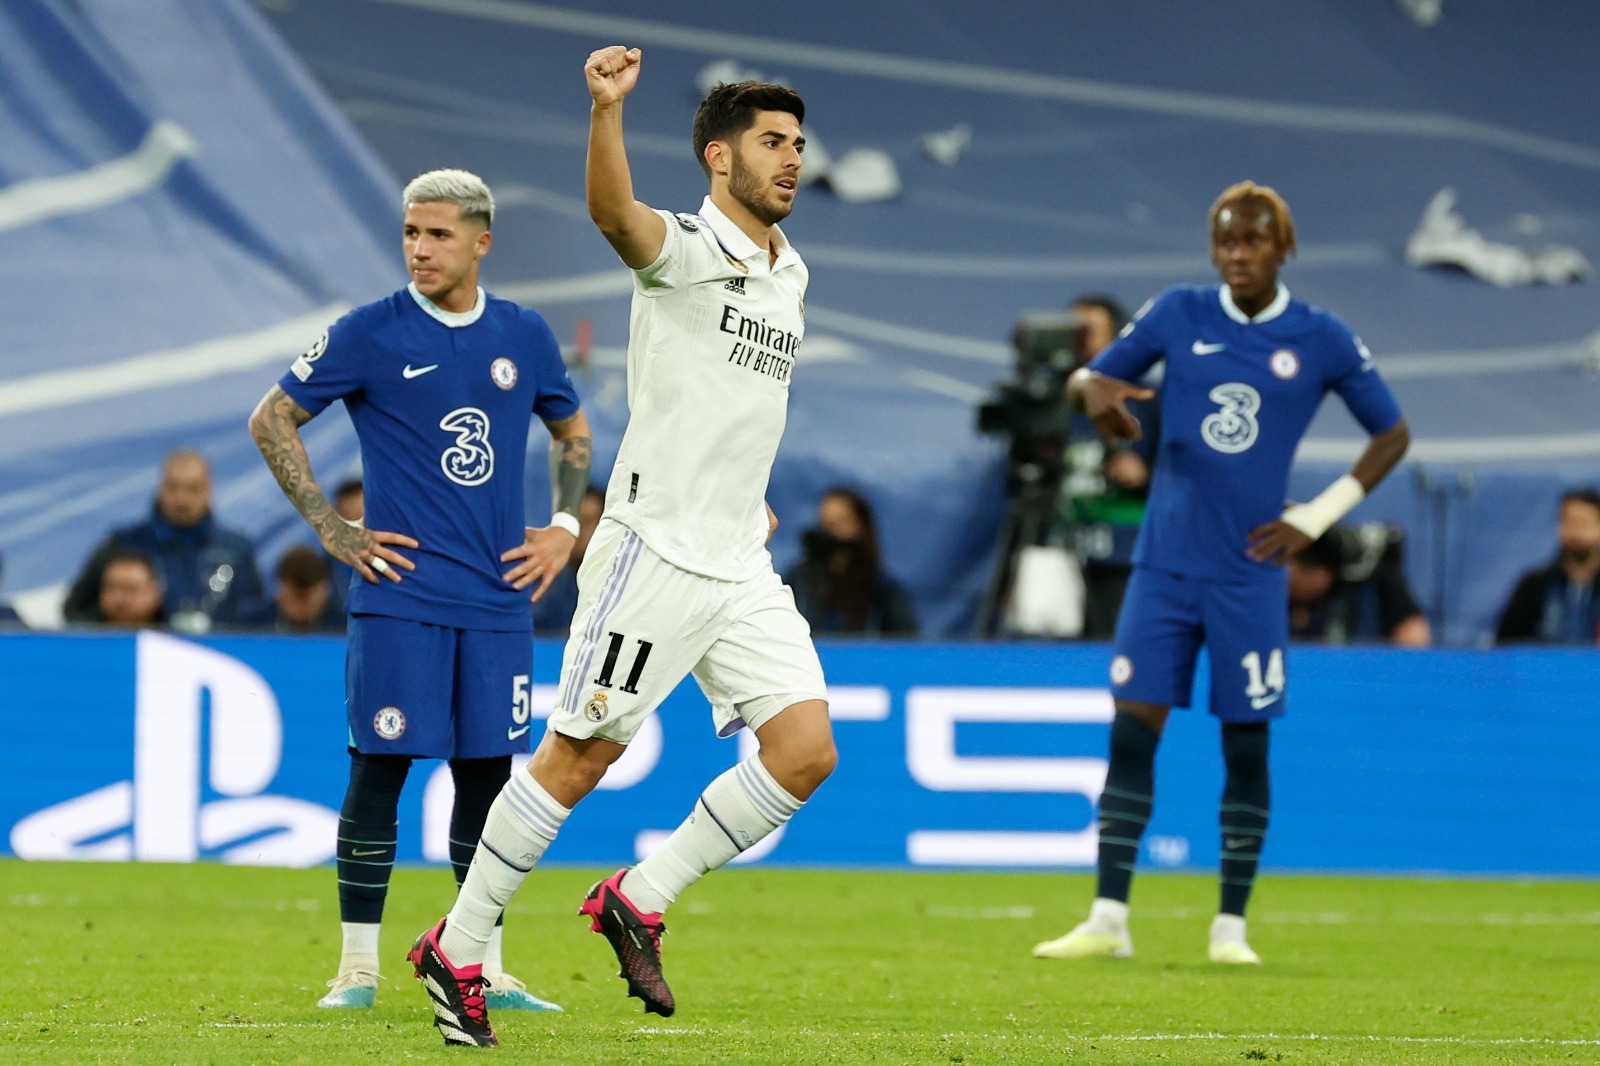 Real Madrid overcomes a historic knot in the Champions League